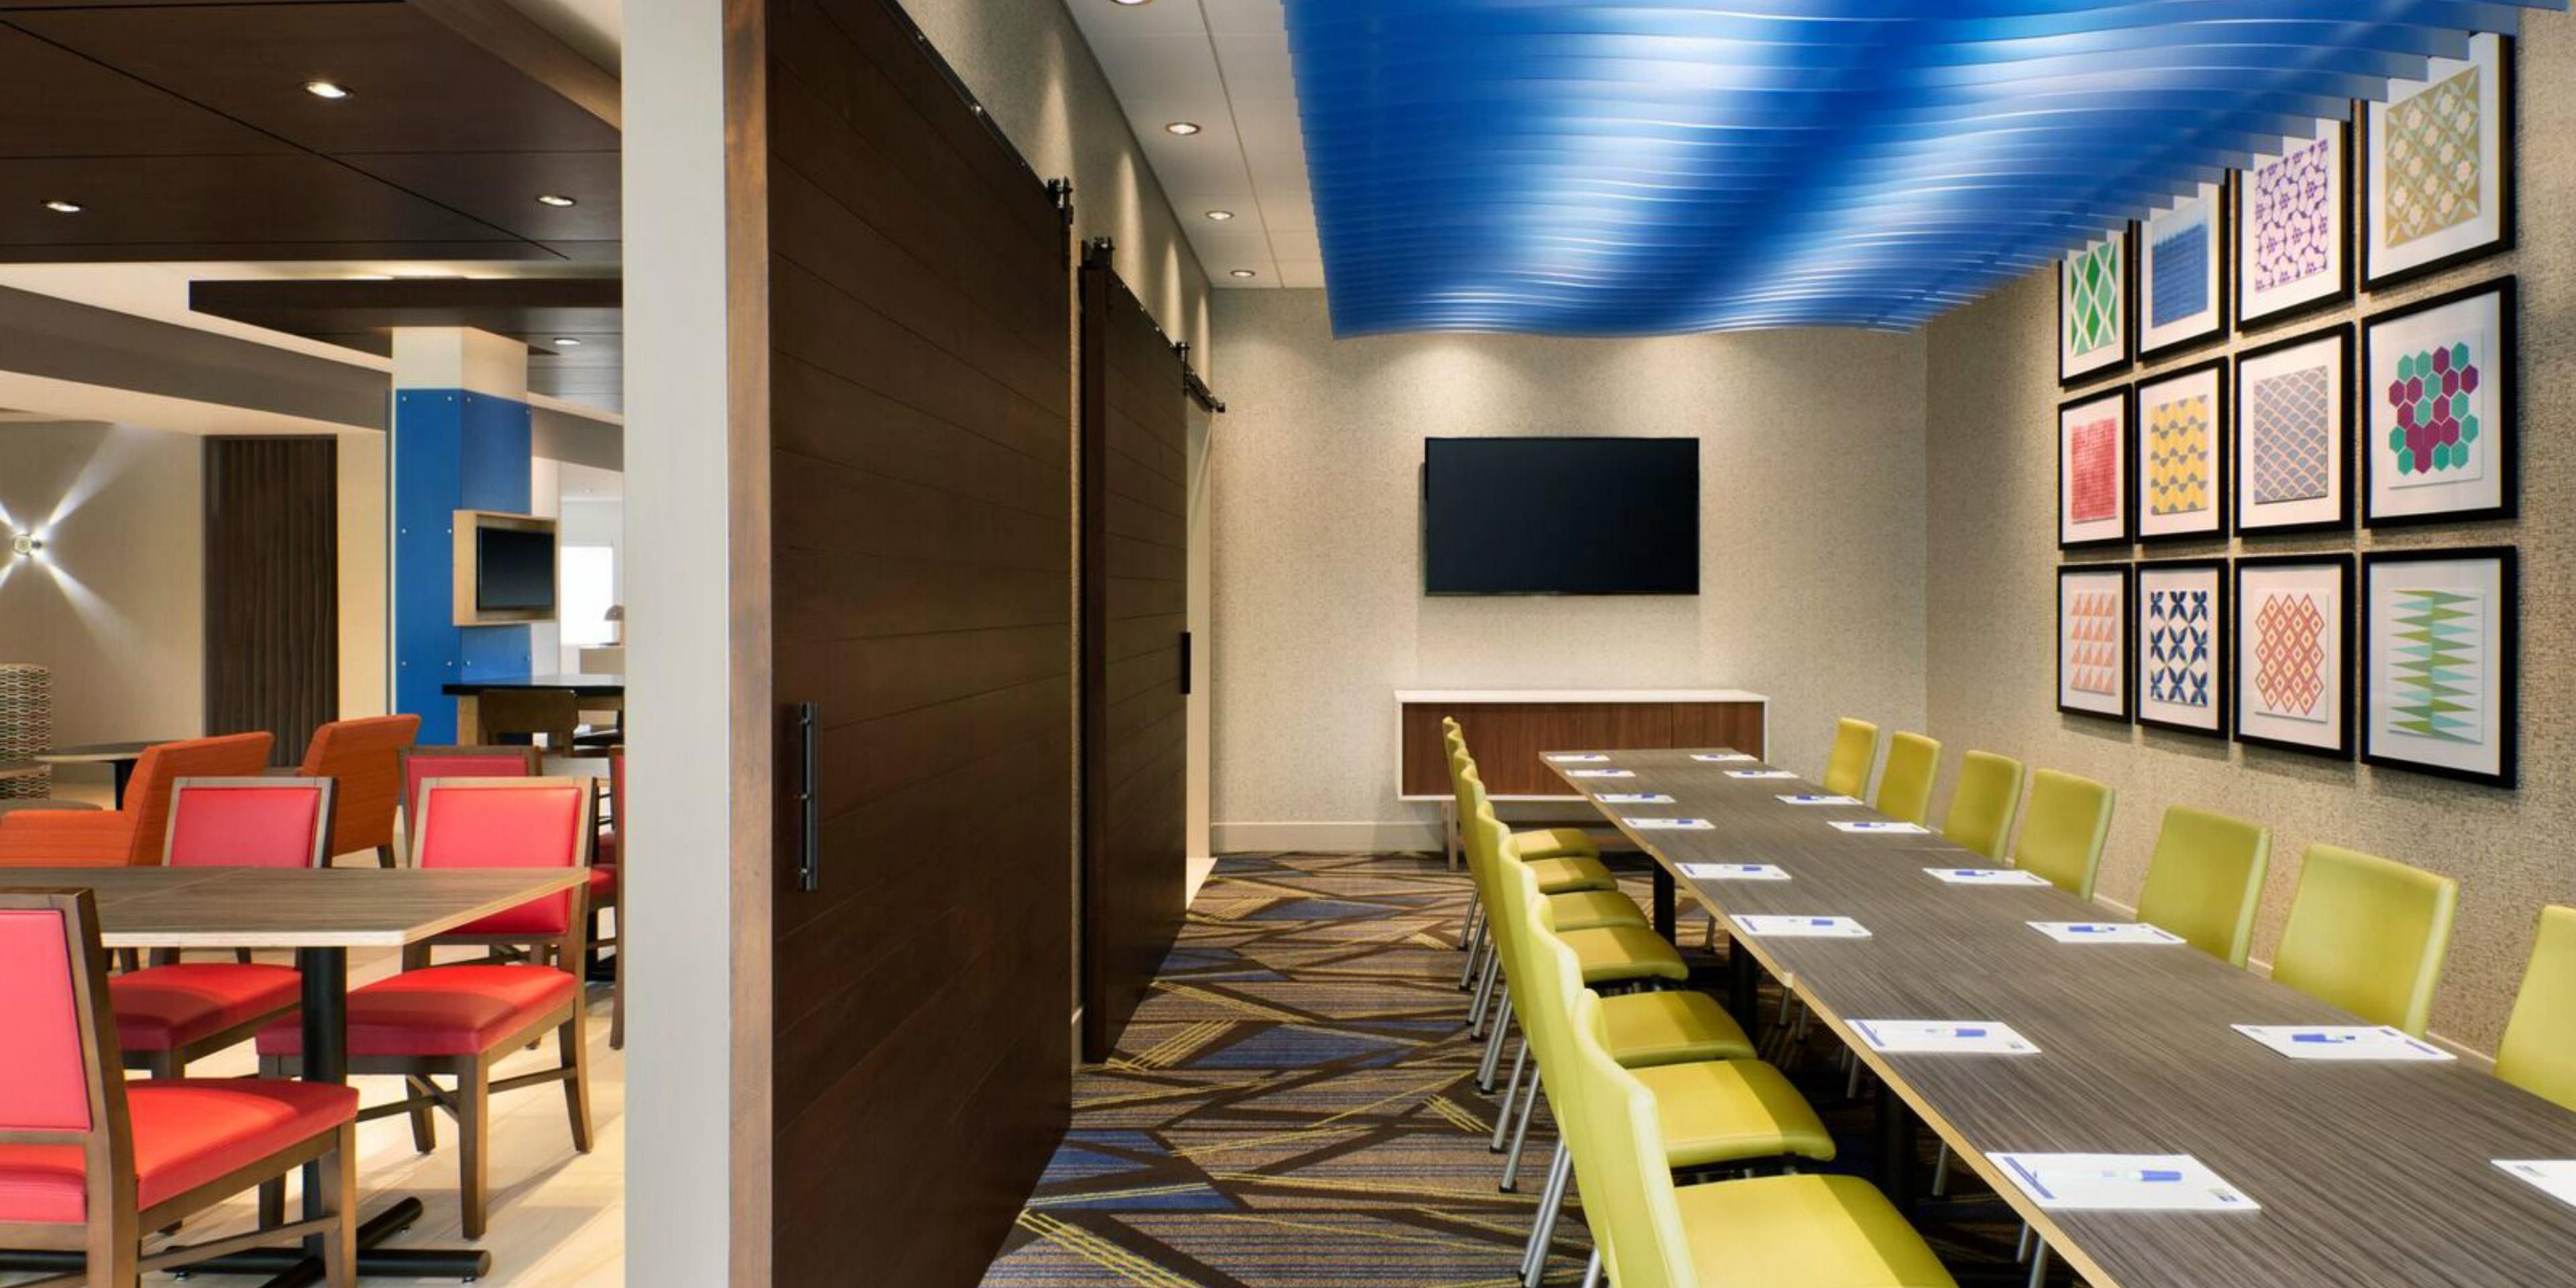 We have two meeting rooms and can accommodate up to 40 people with a variety of seating options. Call today to check rates and availability. We look forward to having the opportunity to be of service to you. 